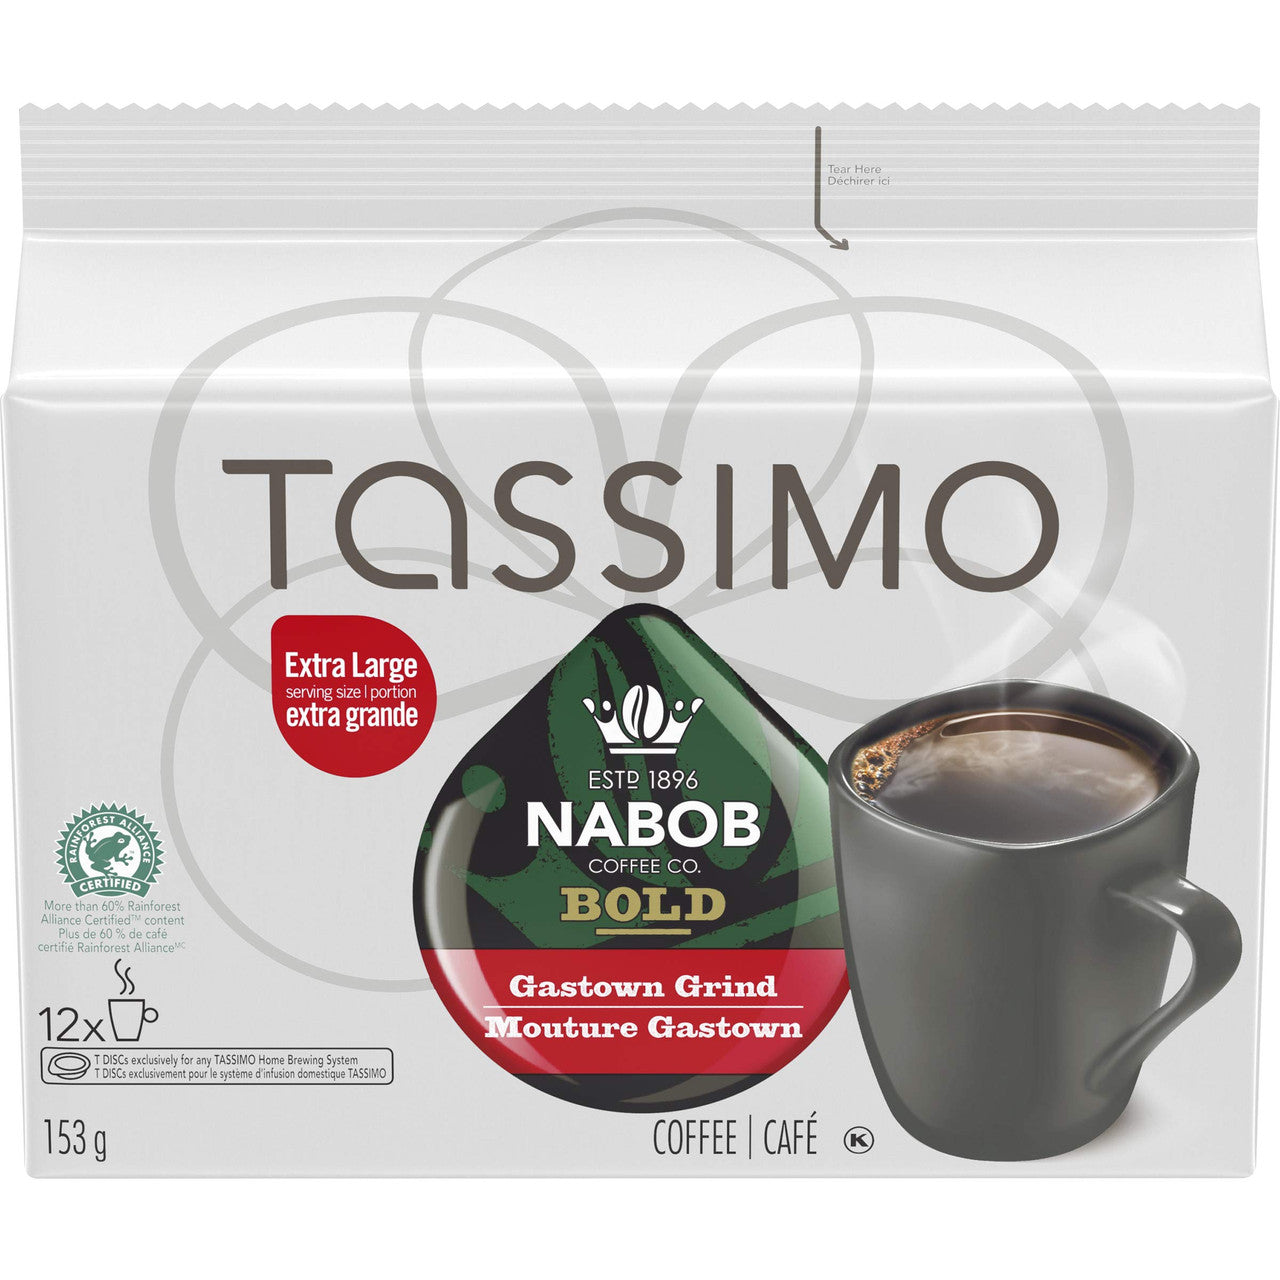 Tassimo Nabob Bold Gastown Grind Coffee, 60 T-Discs (5 Boxes of 12 T-Discs) {Imported from Canada}